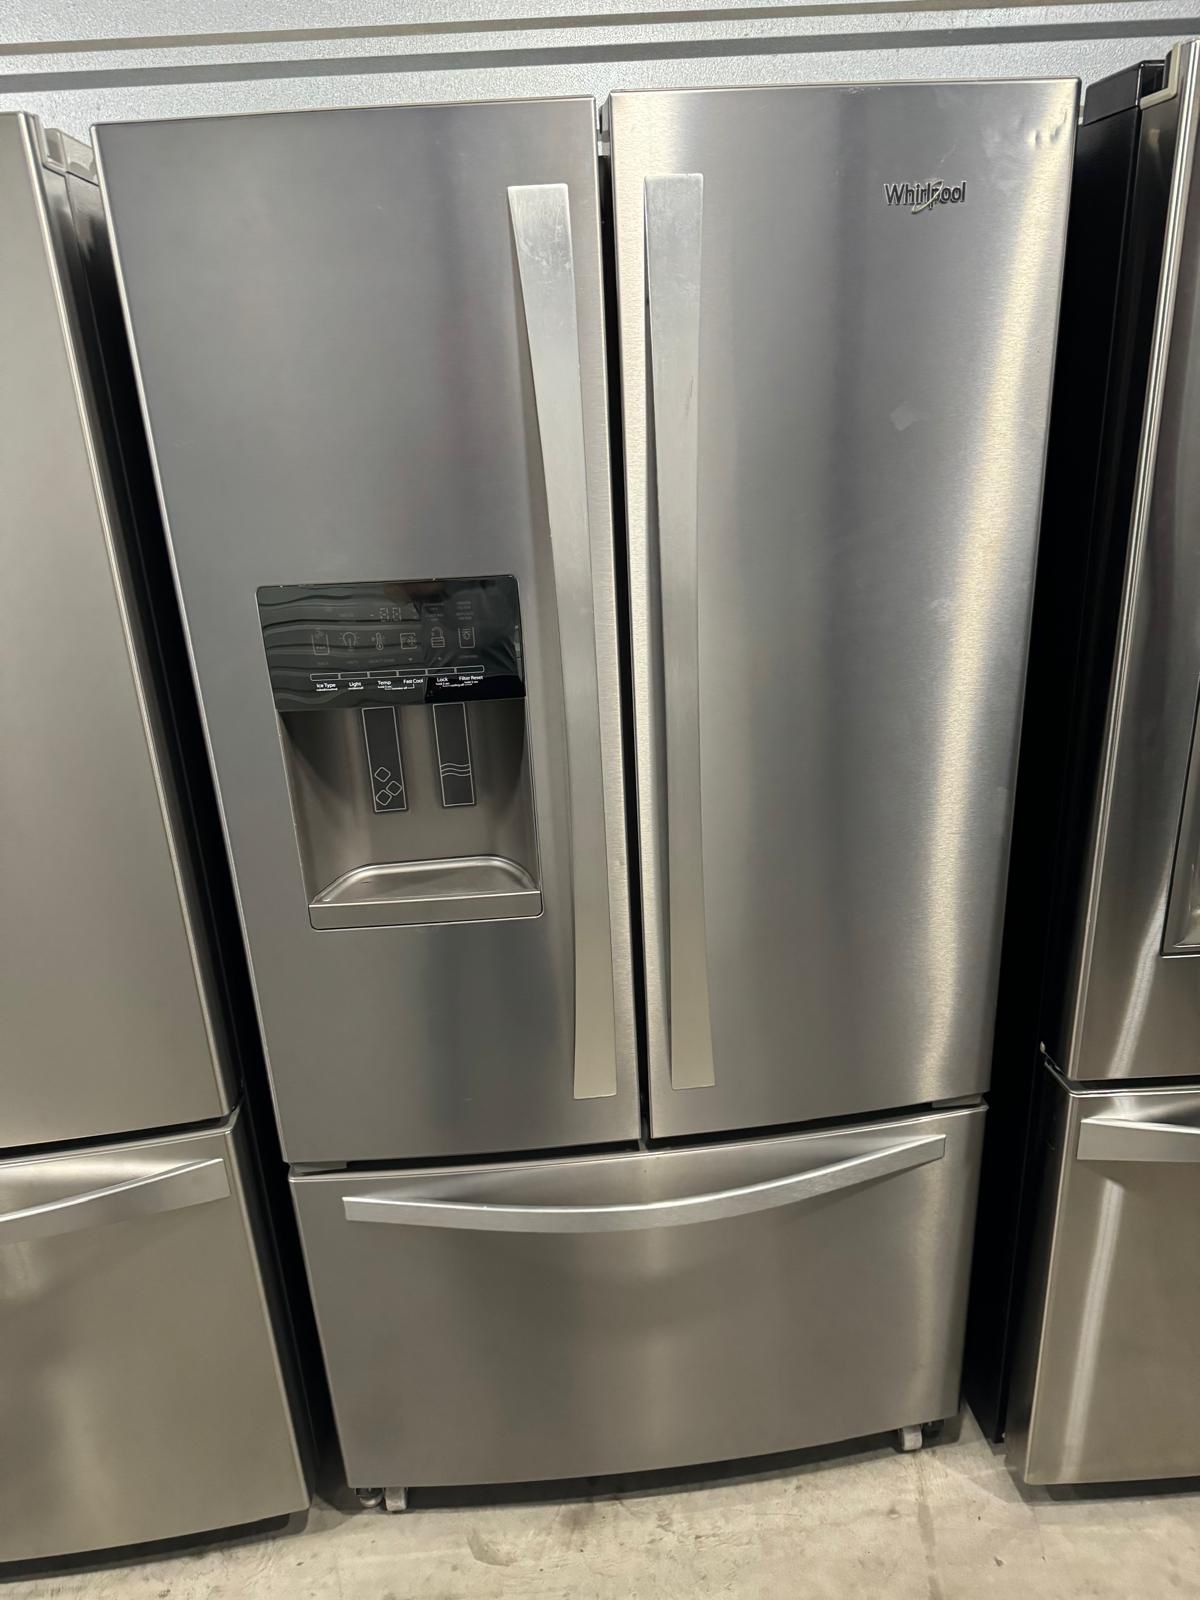 Whirlpool Stainless Steel Refrigerator/ Delivery Available 